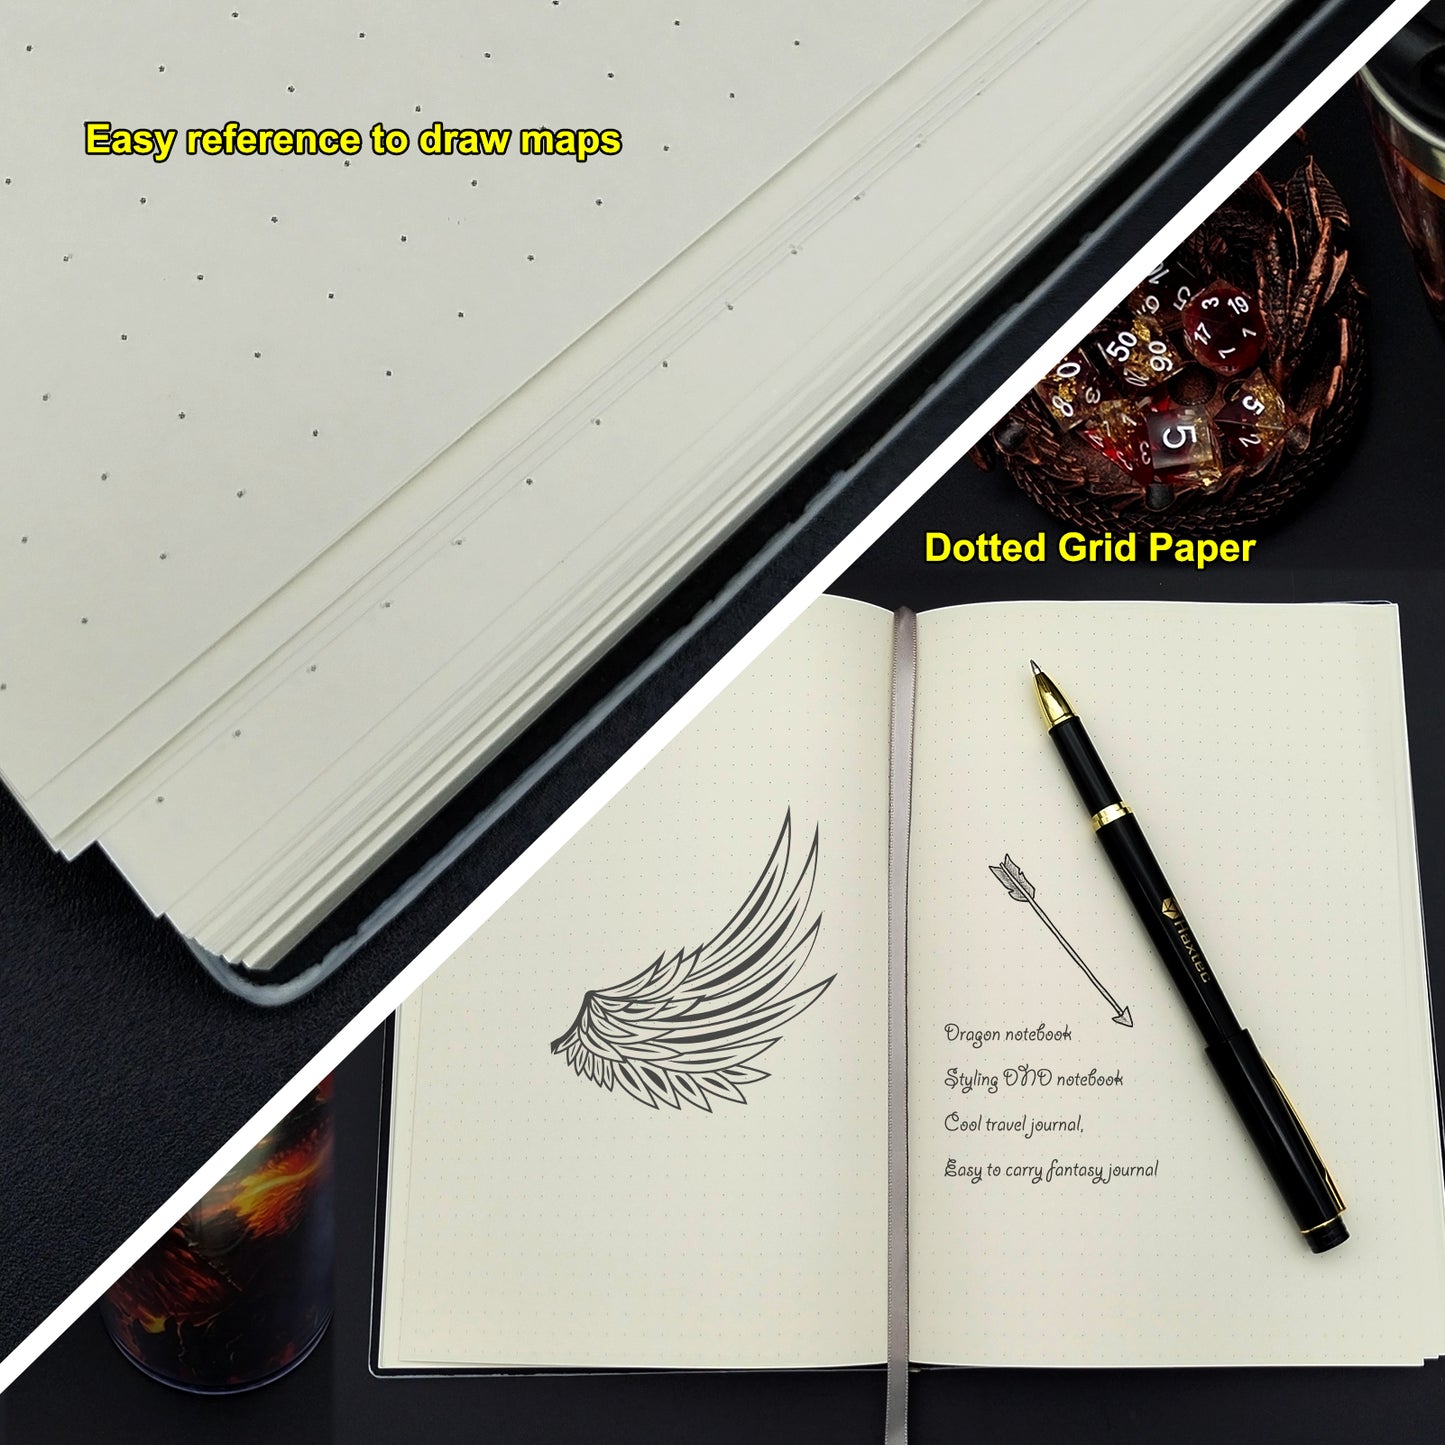 Haxtec DND Notebook Dotte Grid 3D Embossed Dragon Leather Journal W/ Pen Fantasy DND Journal for TTRPG Dungeons and Dragons DM & Player Gifts A5